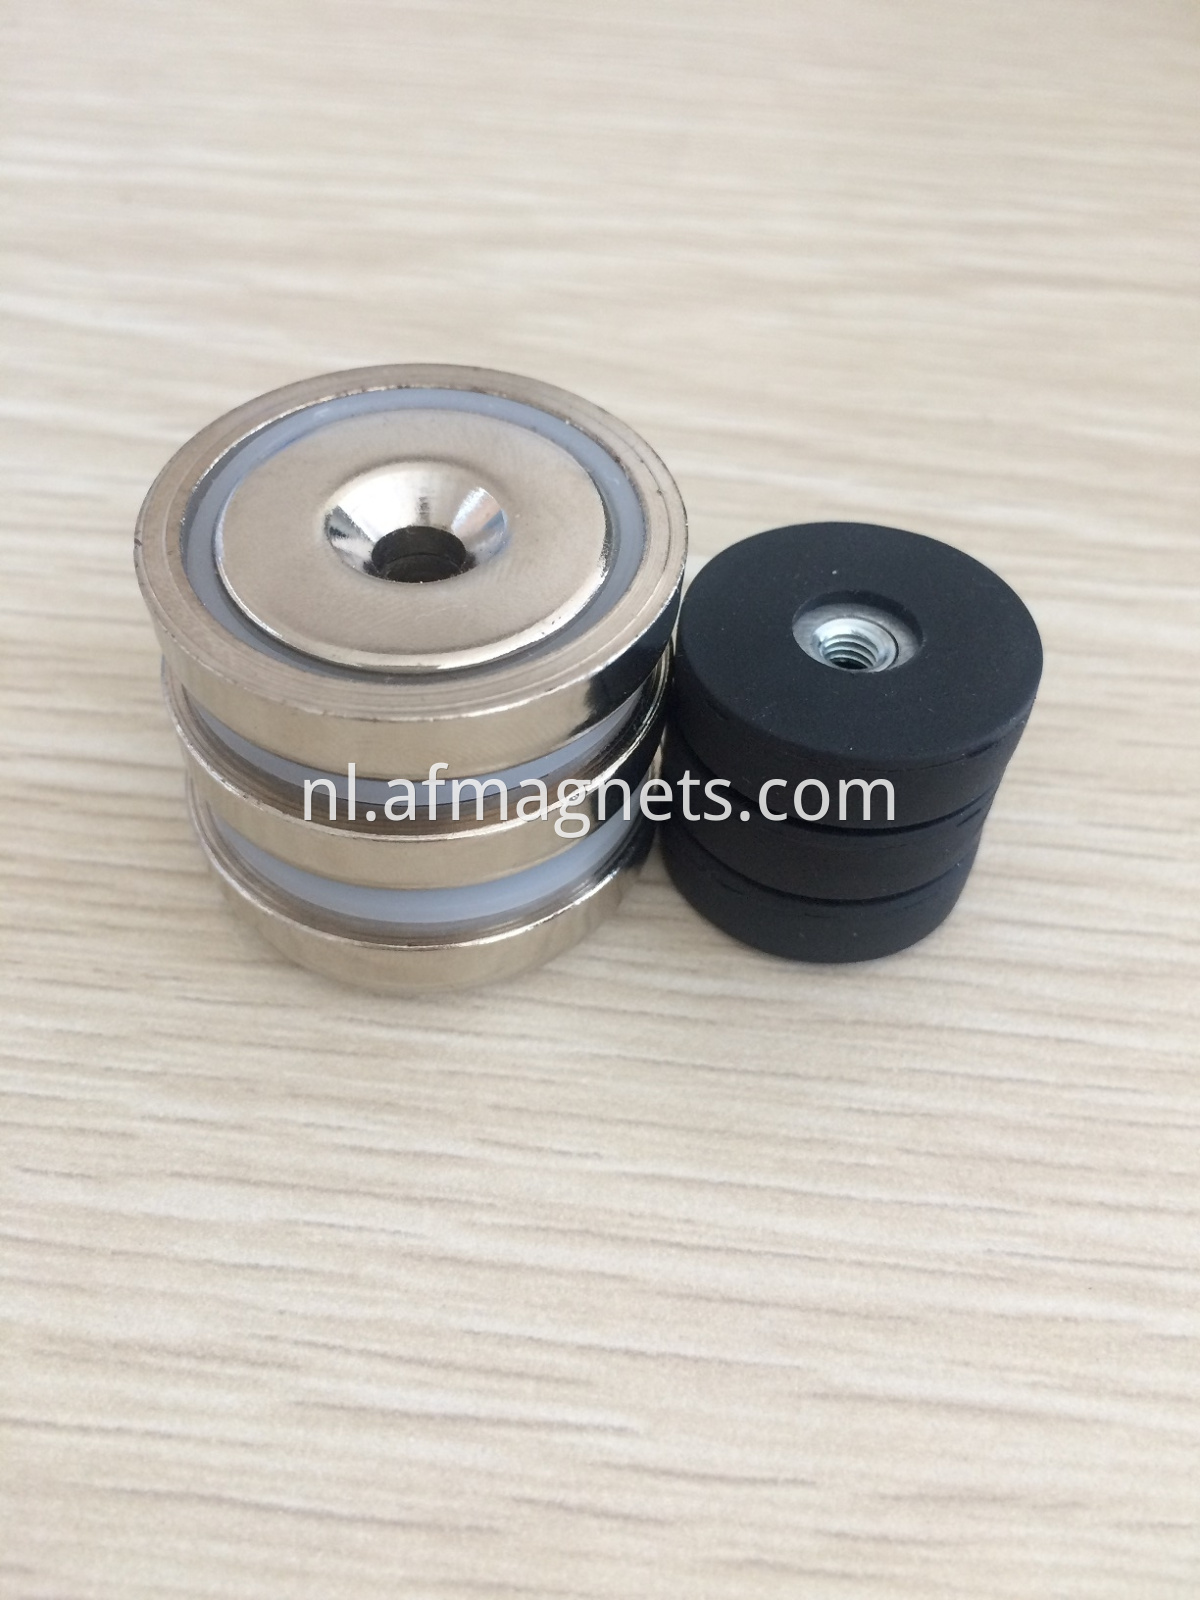 Rubber Coated Neodymium Mounting Magnets